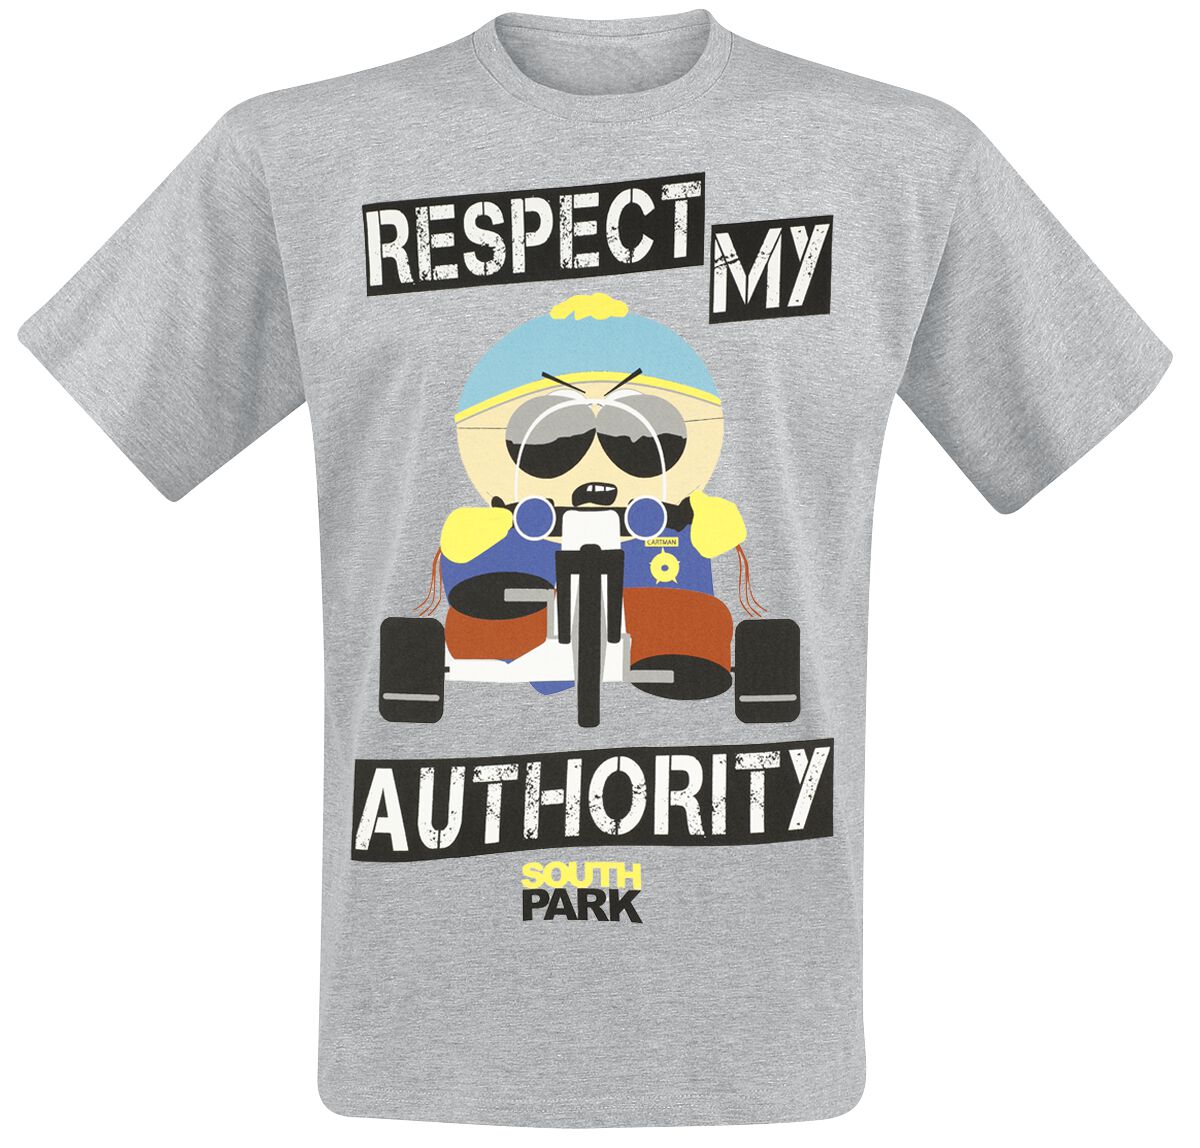 South Park Respect My Authority T-Shirt grey